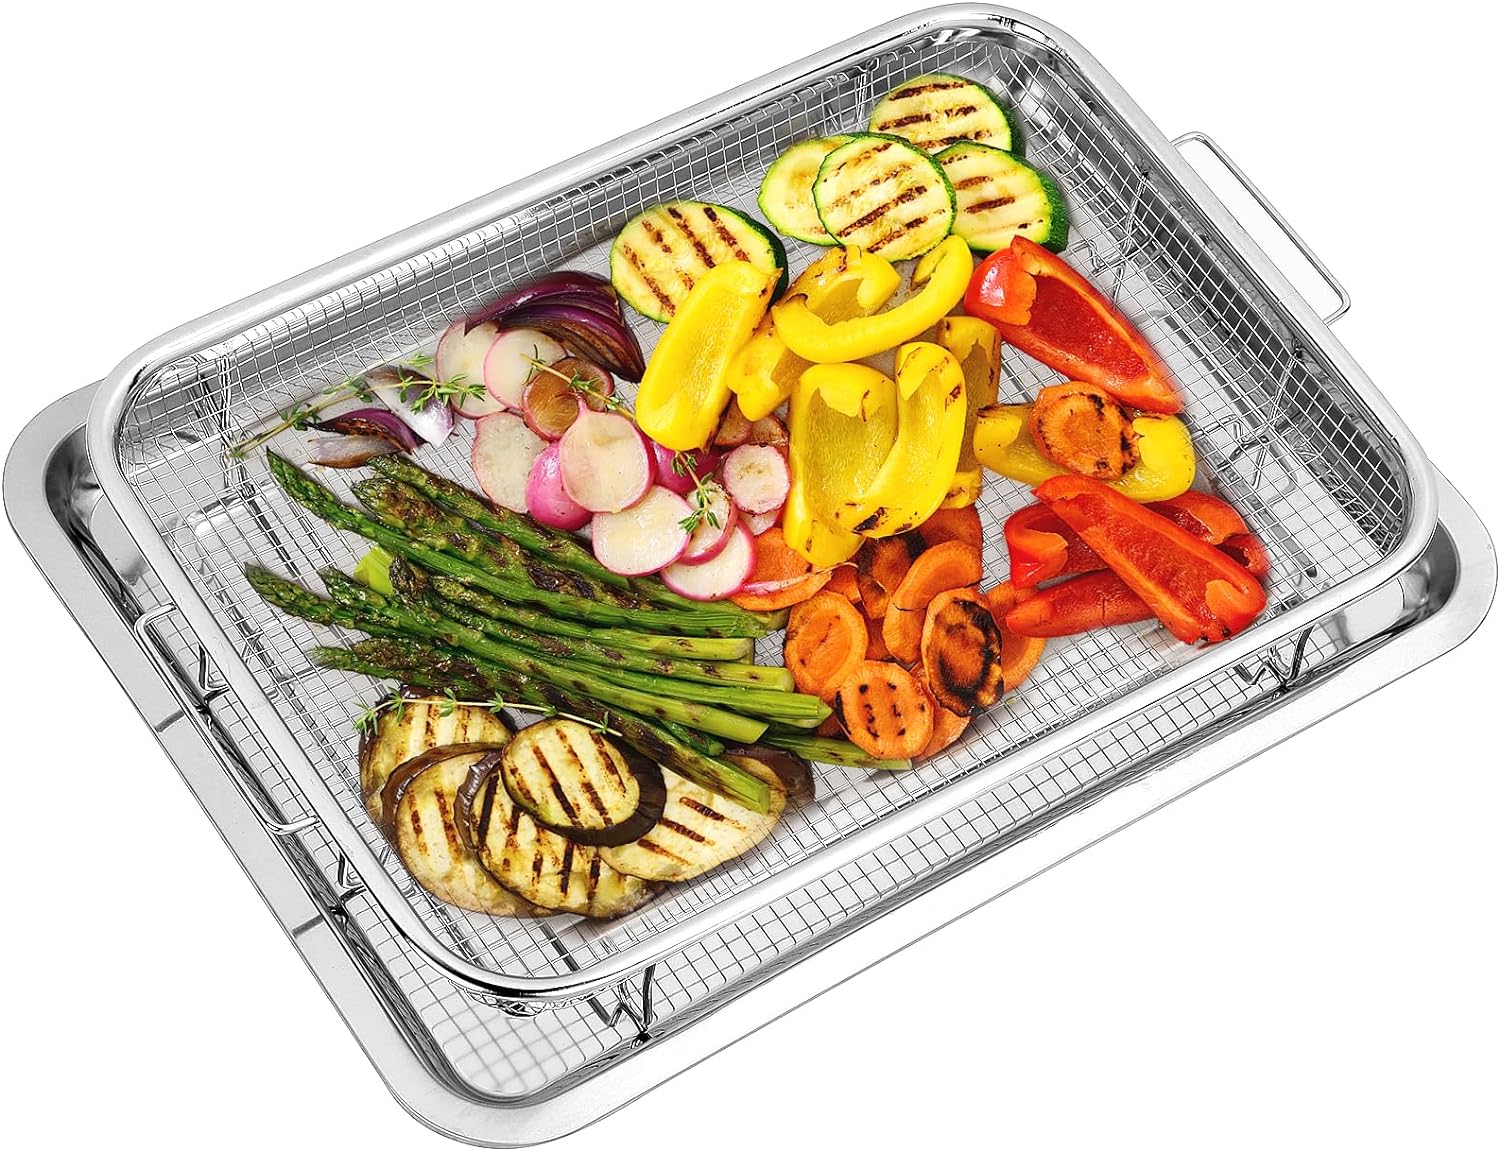 Air Fryer Basket and Tray for Oven Set, 15.5'' x 11.5'' Stainless Steel  Extra Large Crisper Tray and Basket, Non-stick Mesh Basket Set, Air Fryer  Tray